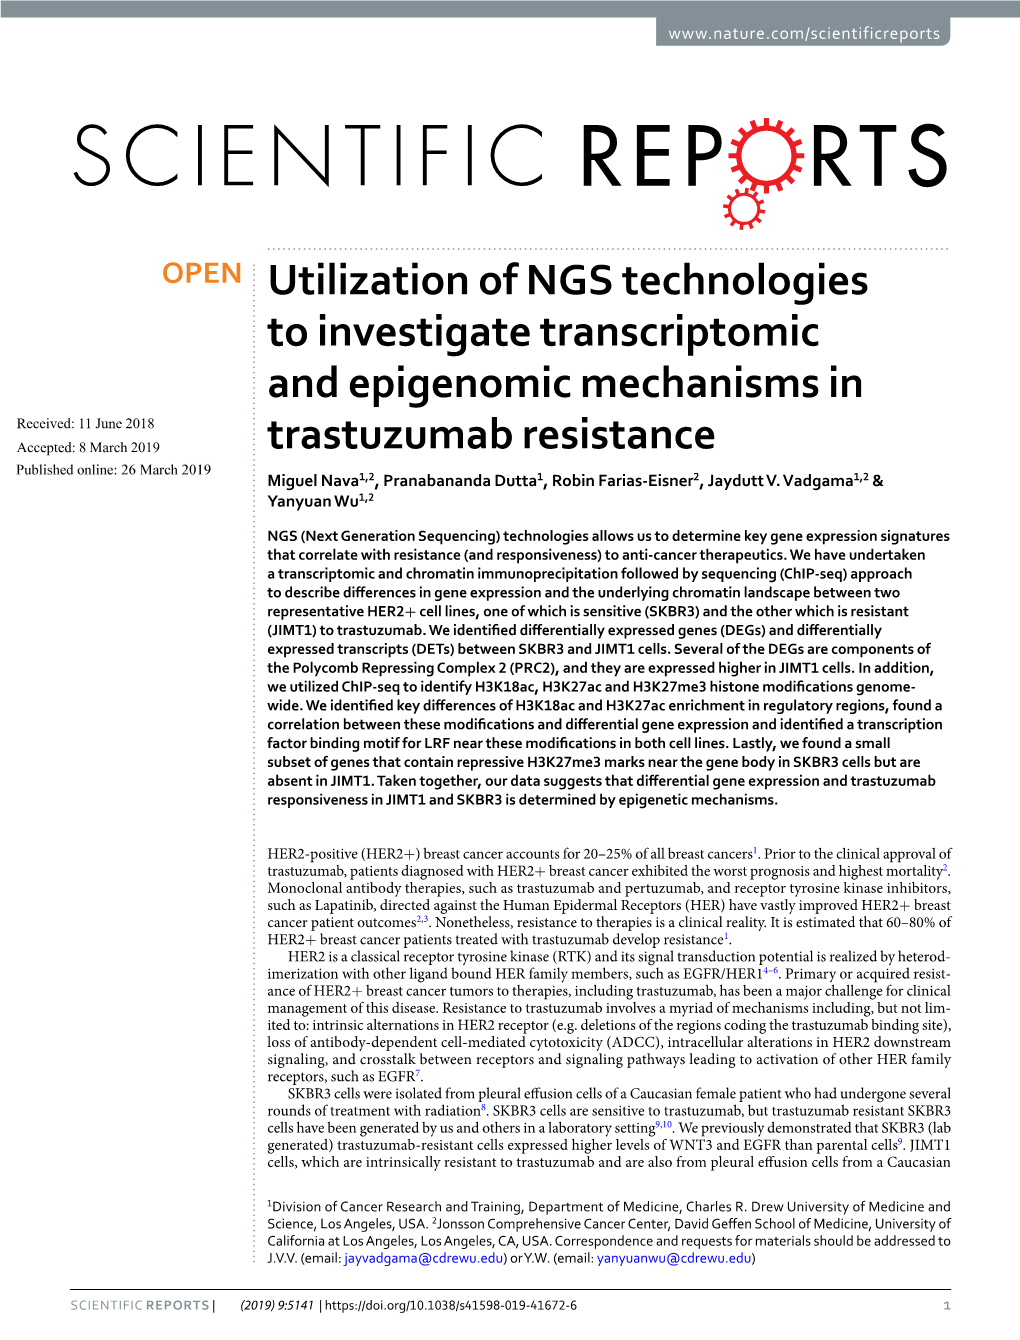 Utilization of NGS Technologies to Investigate Transcriptomic And